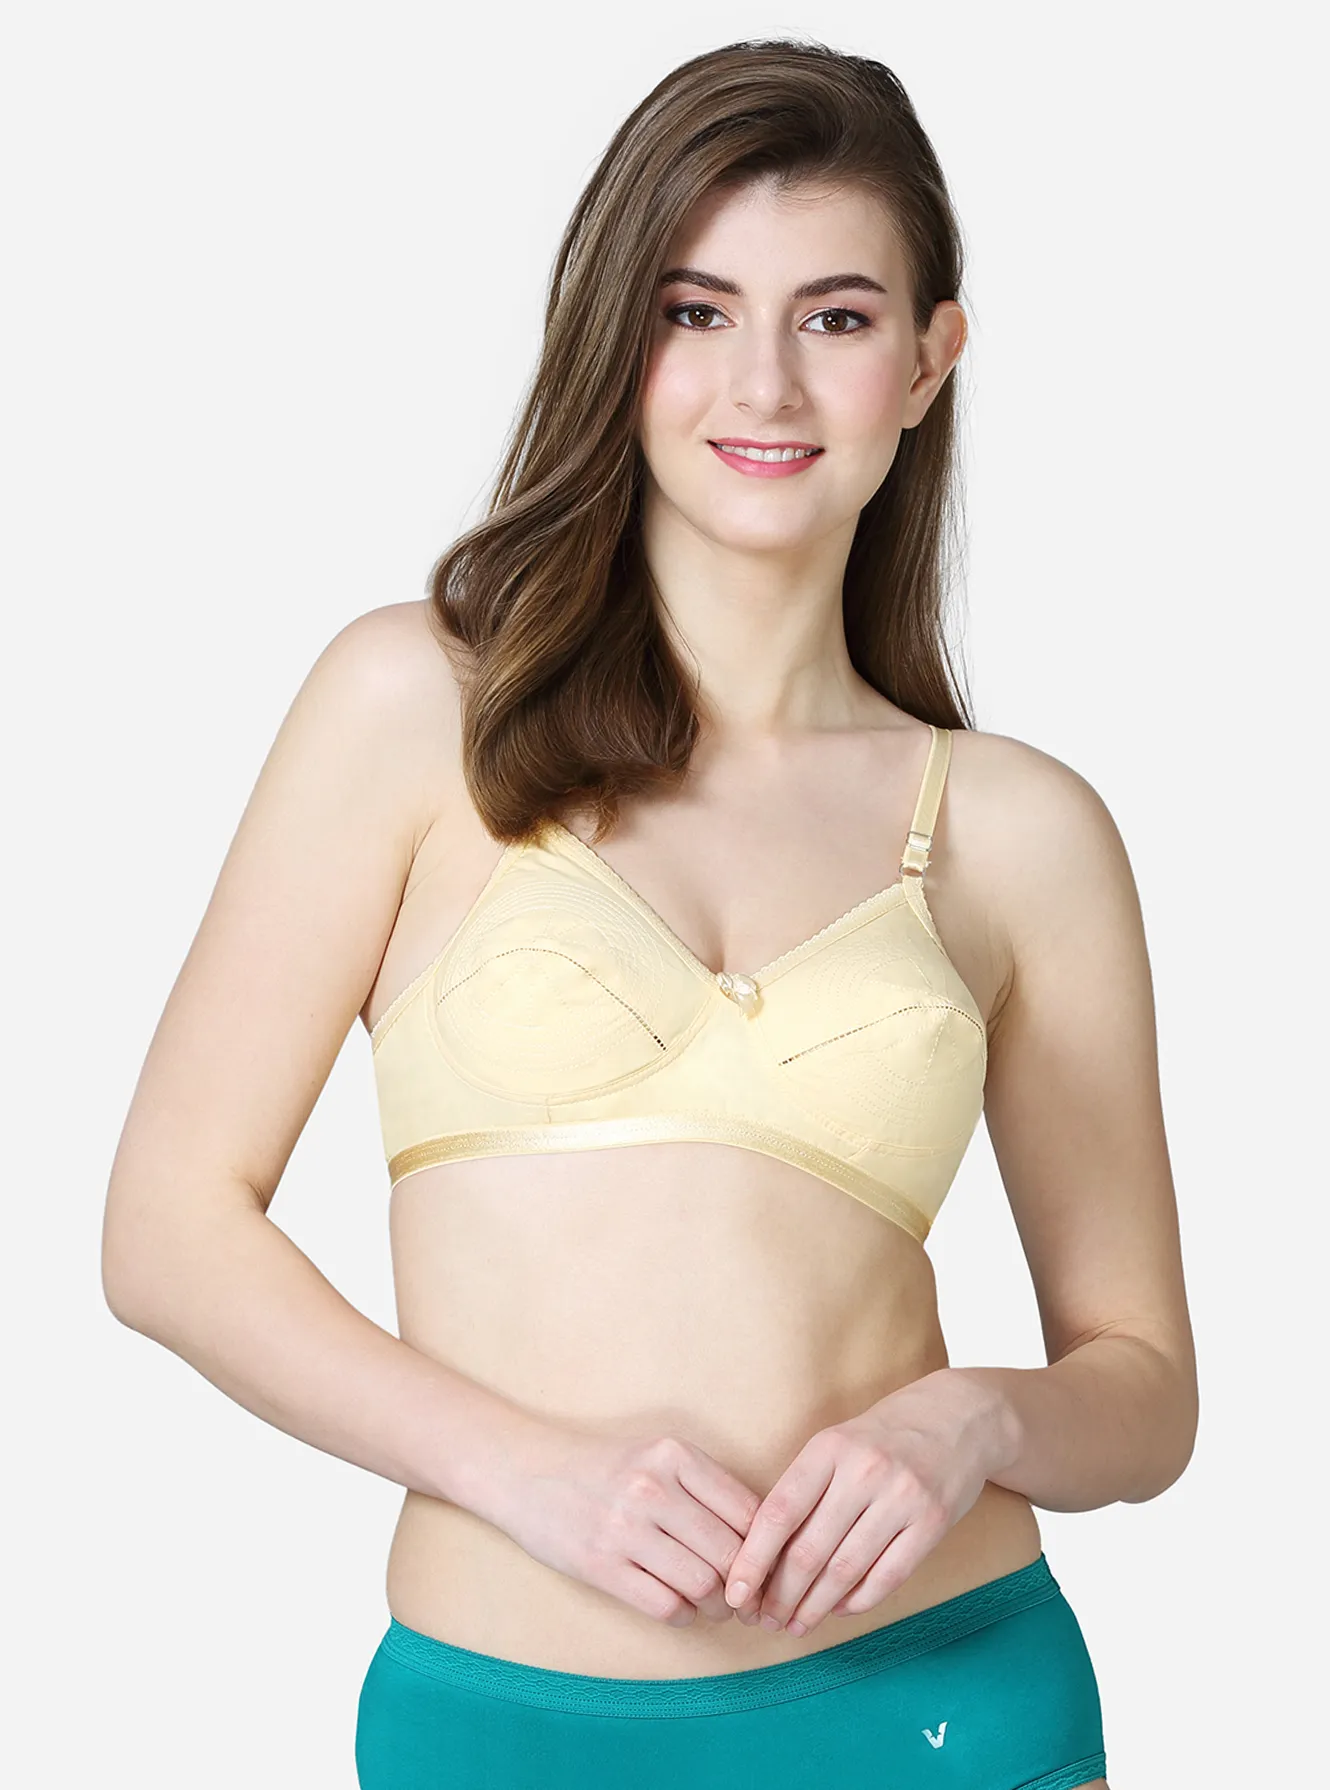 TWEENS by Belle Lingeries Full Coverage Padded Women T-Shirt Bra - Buy Red  TWEENS by Belle Lingeries Full Coverage Padded Women T-Shirt Bra Online at  Best Prices in India